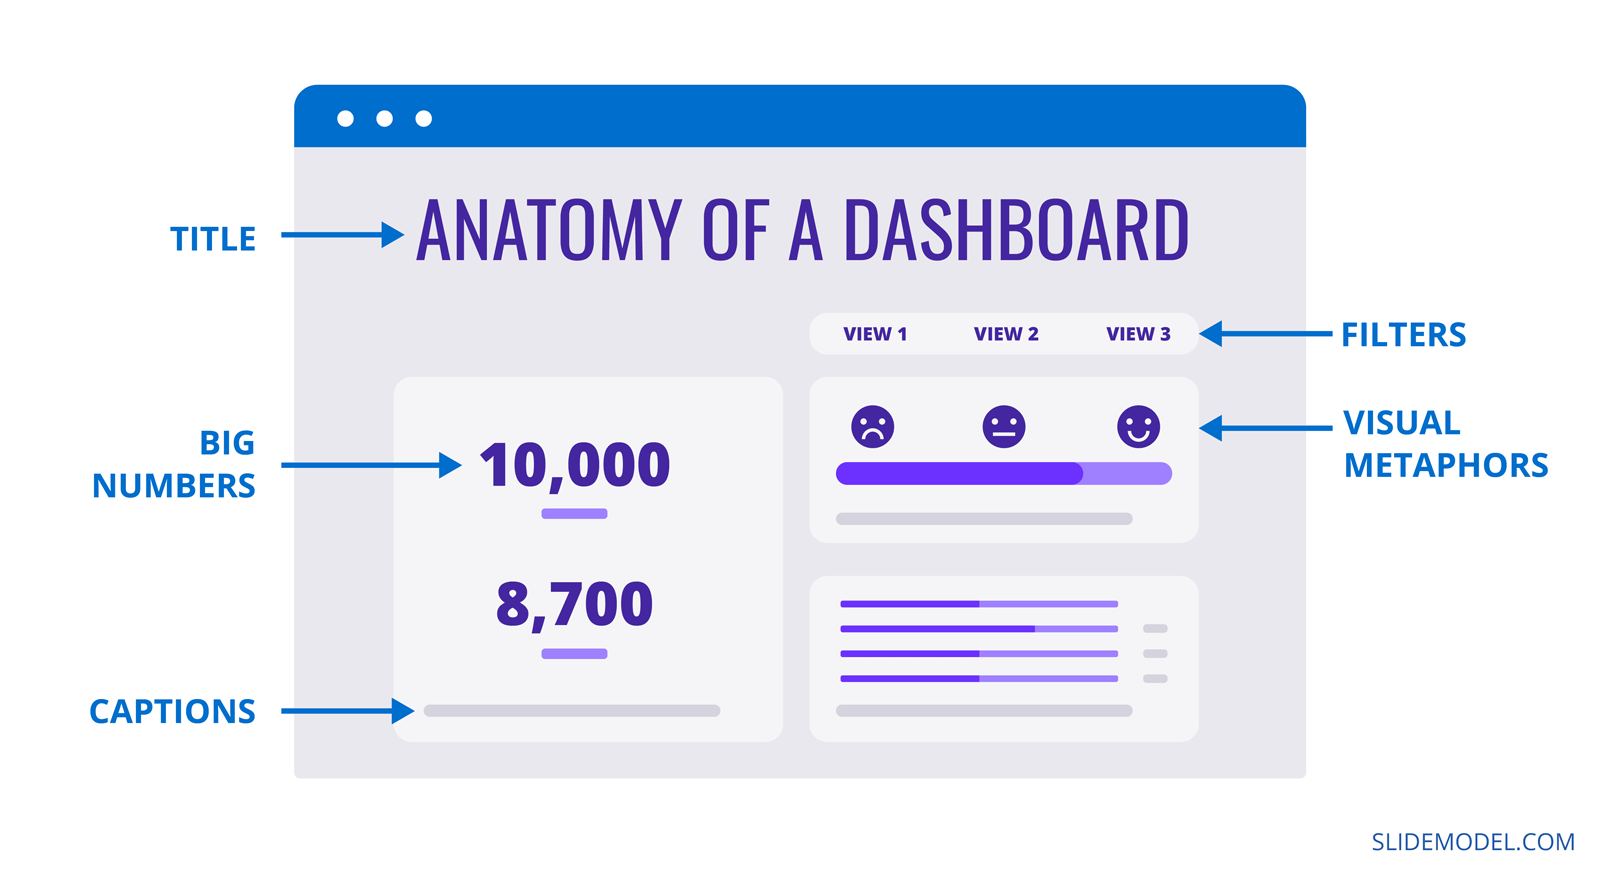 Anatomy of a winning dashboard presentation showing filters, title, big numbers, caption, visual metaphors and data.